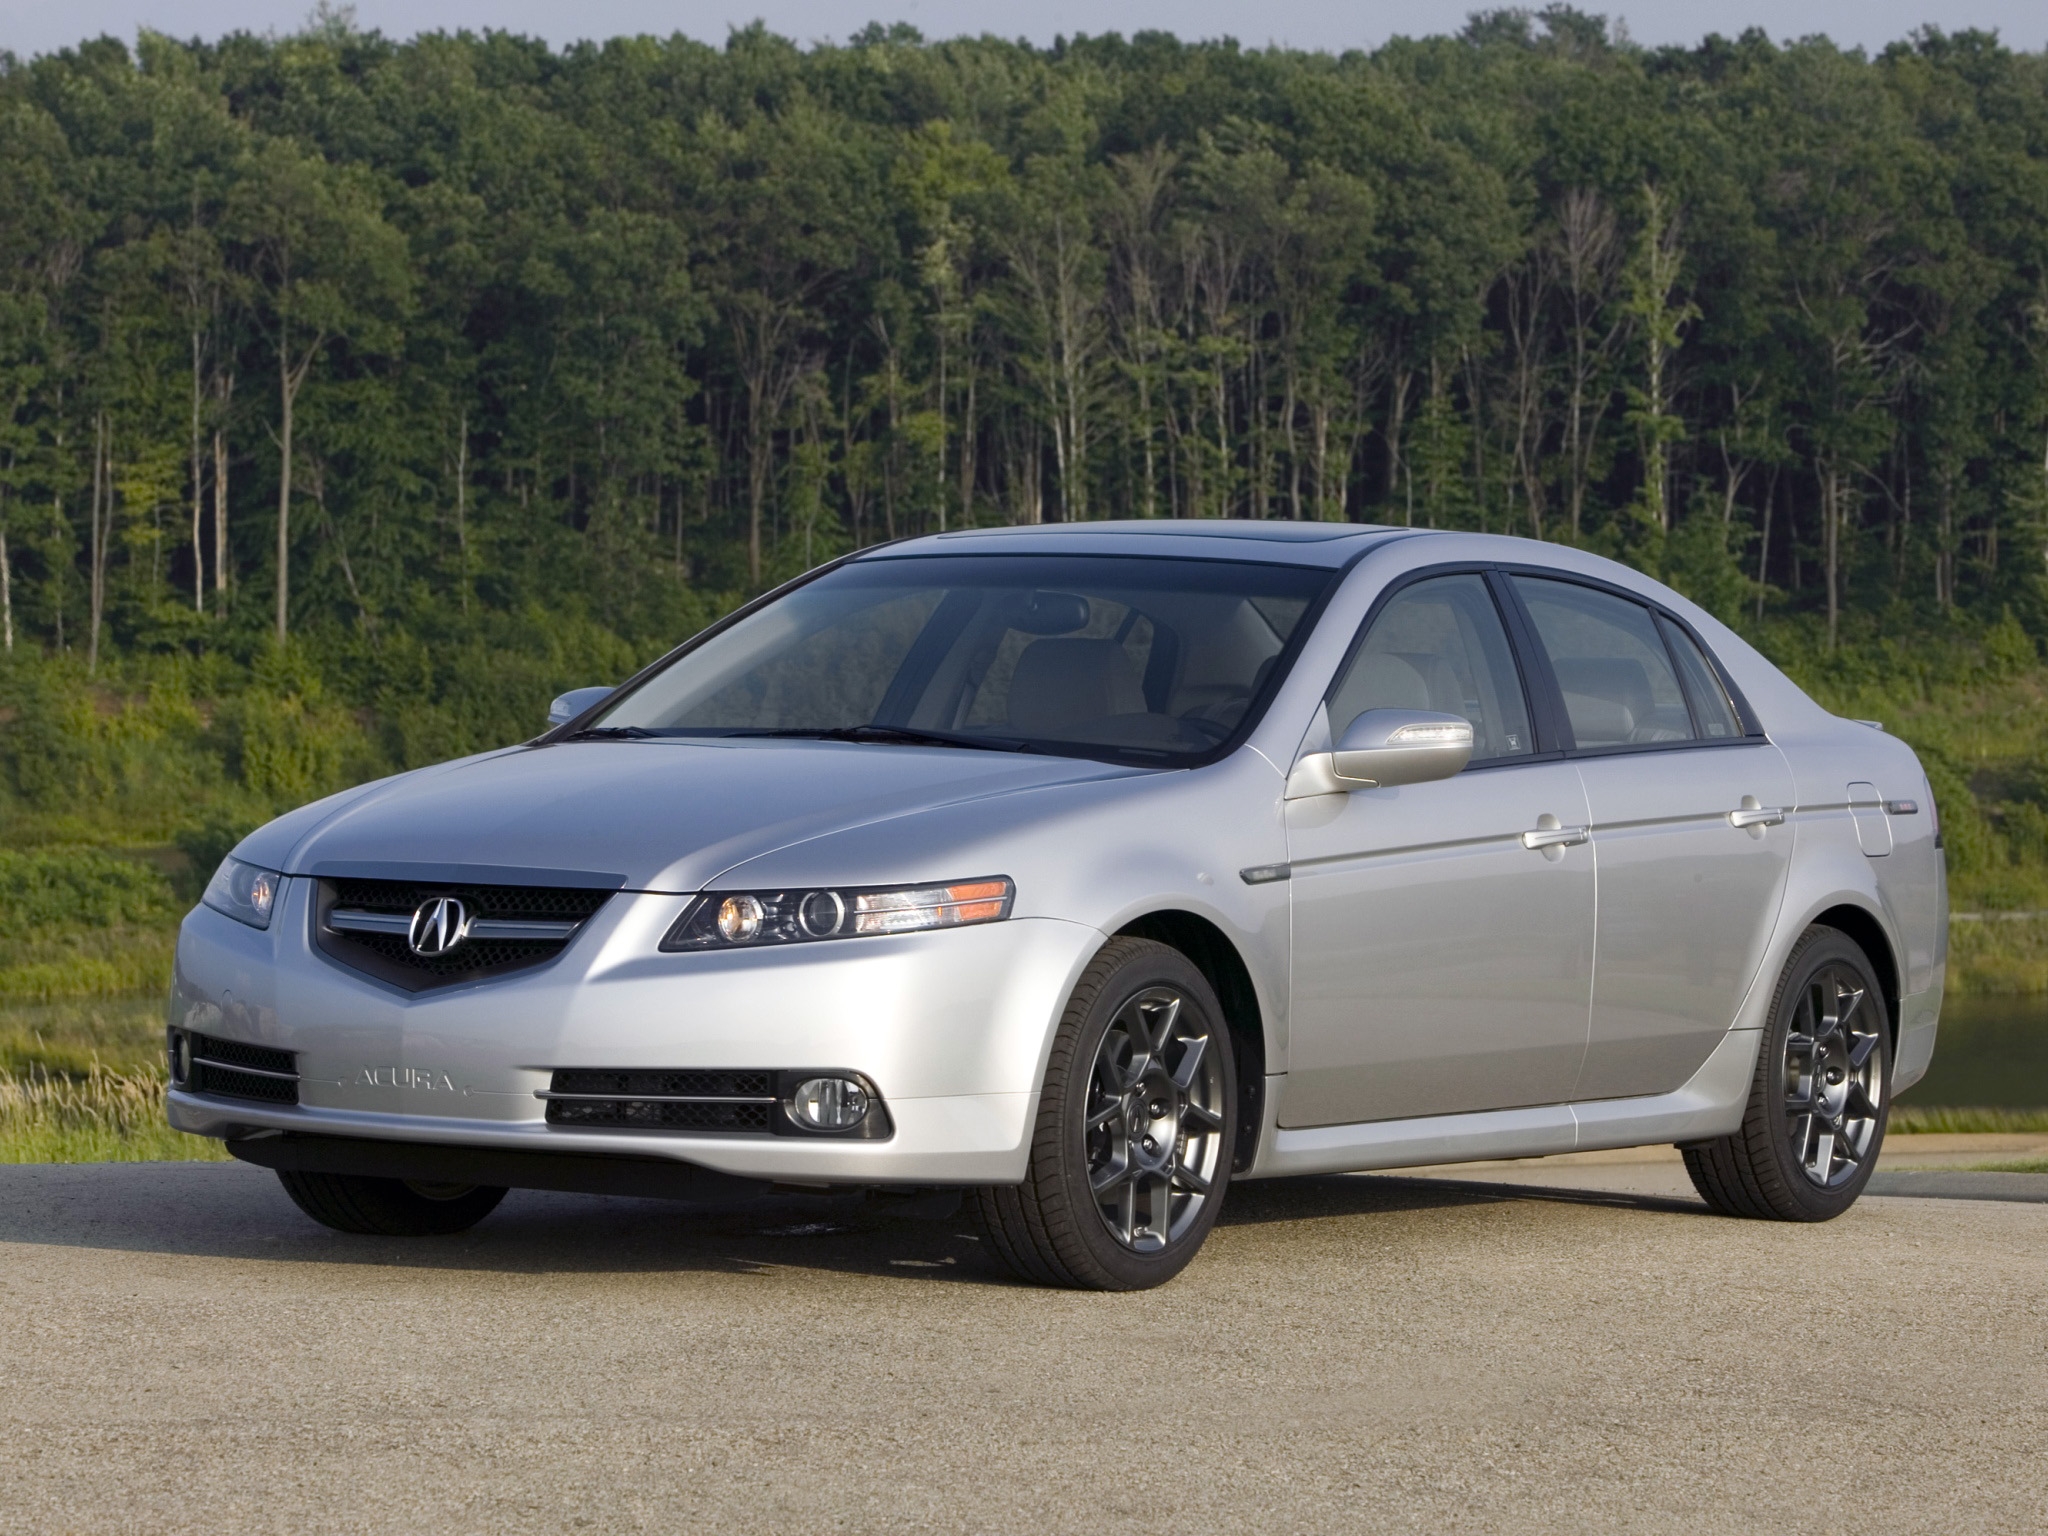 cars, auto, grass, acura, forest, front view, style, akura, shrubs, tl, 2007, silver metallic Full HD